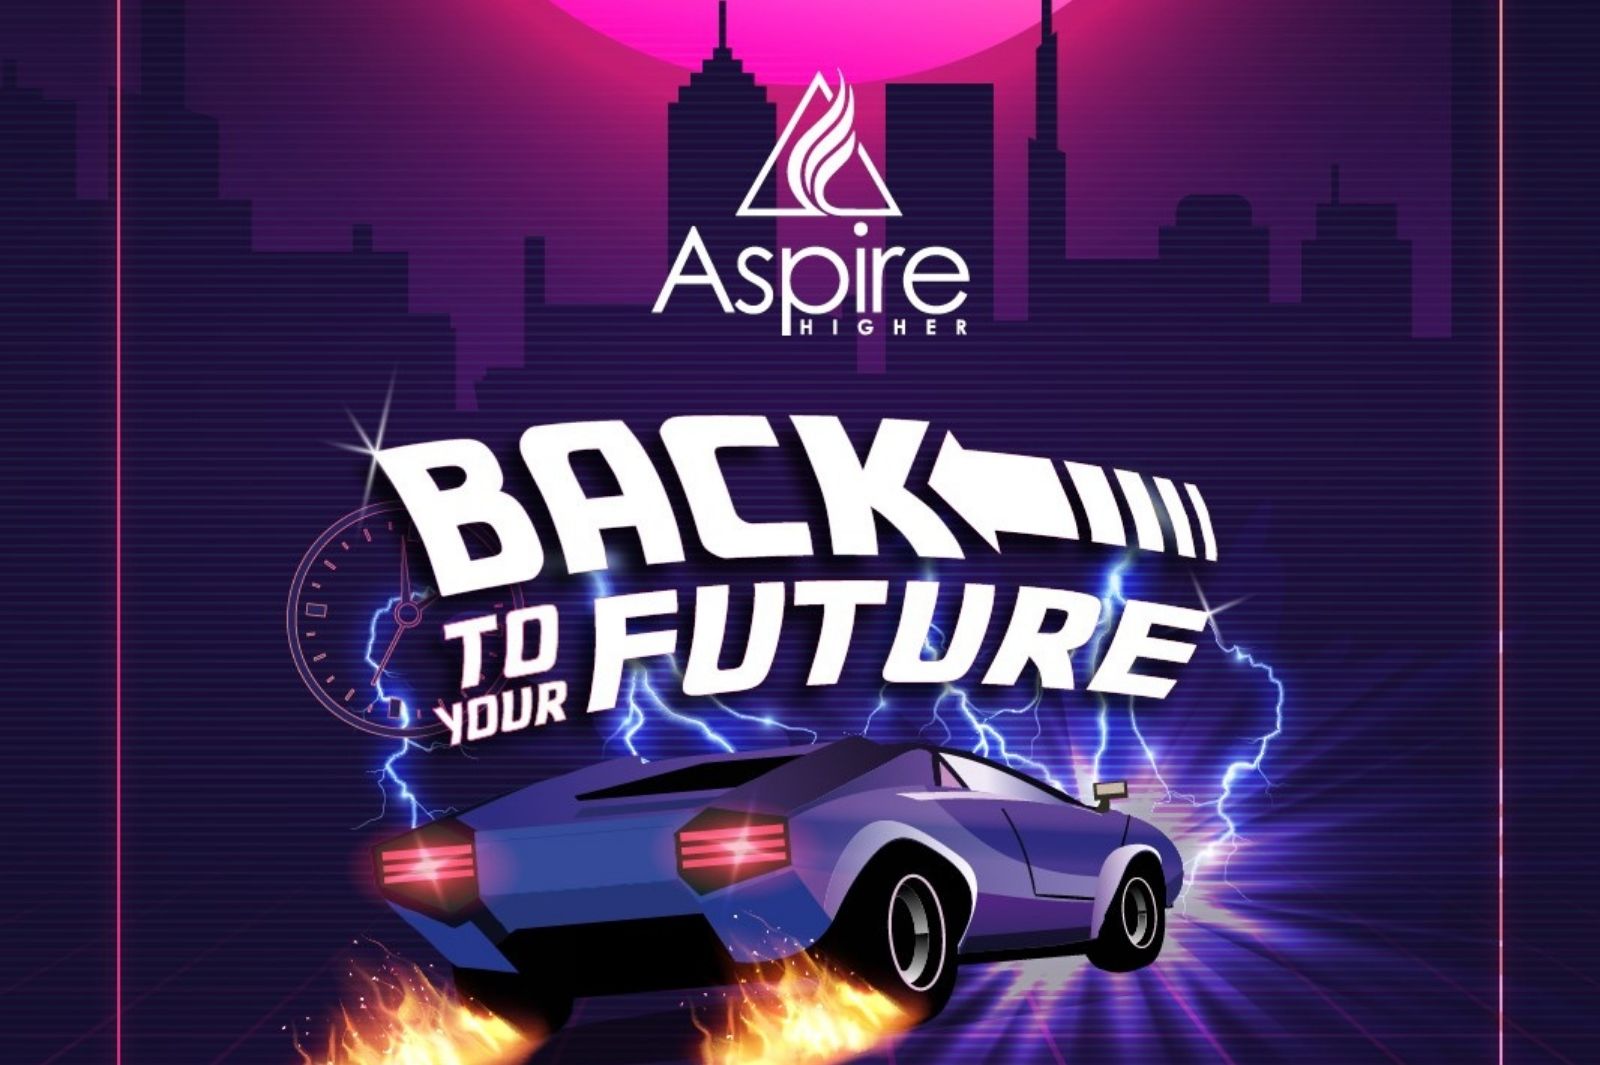 Aspire Higher Back to Your Future